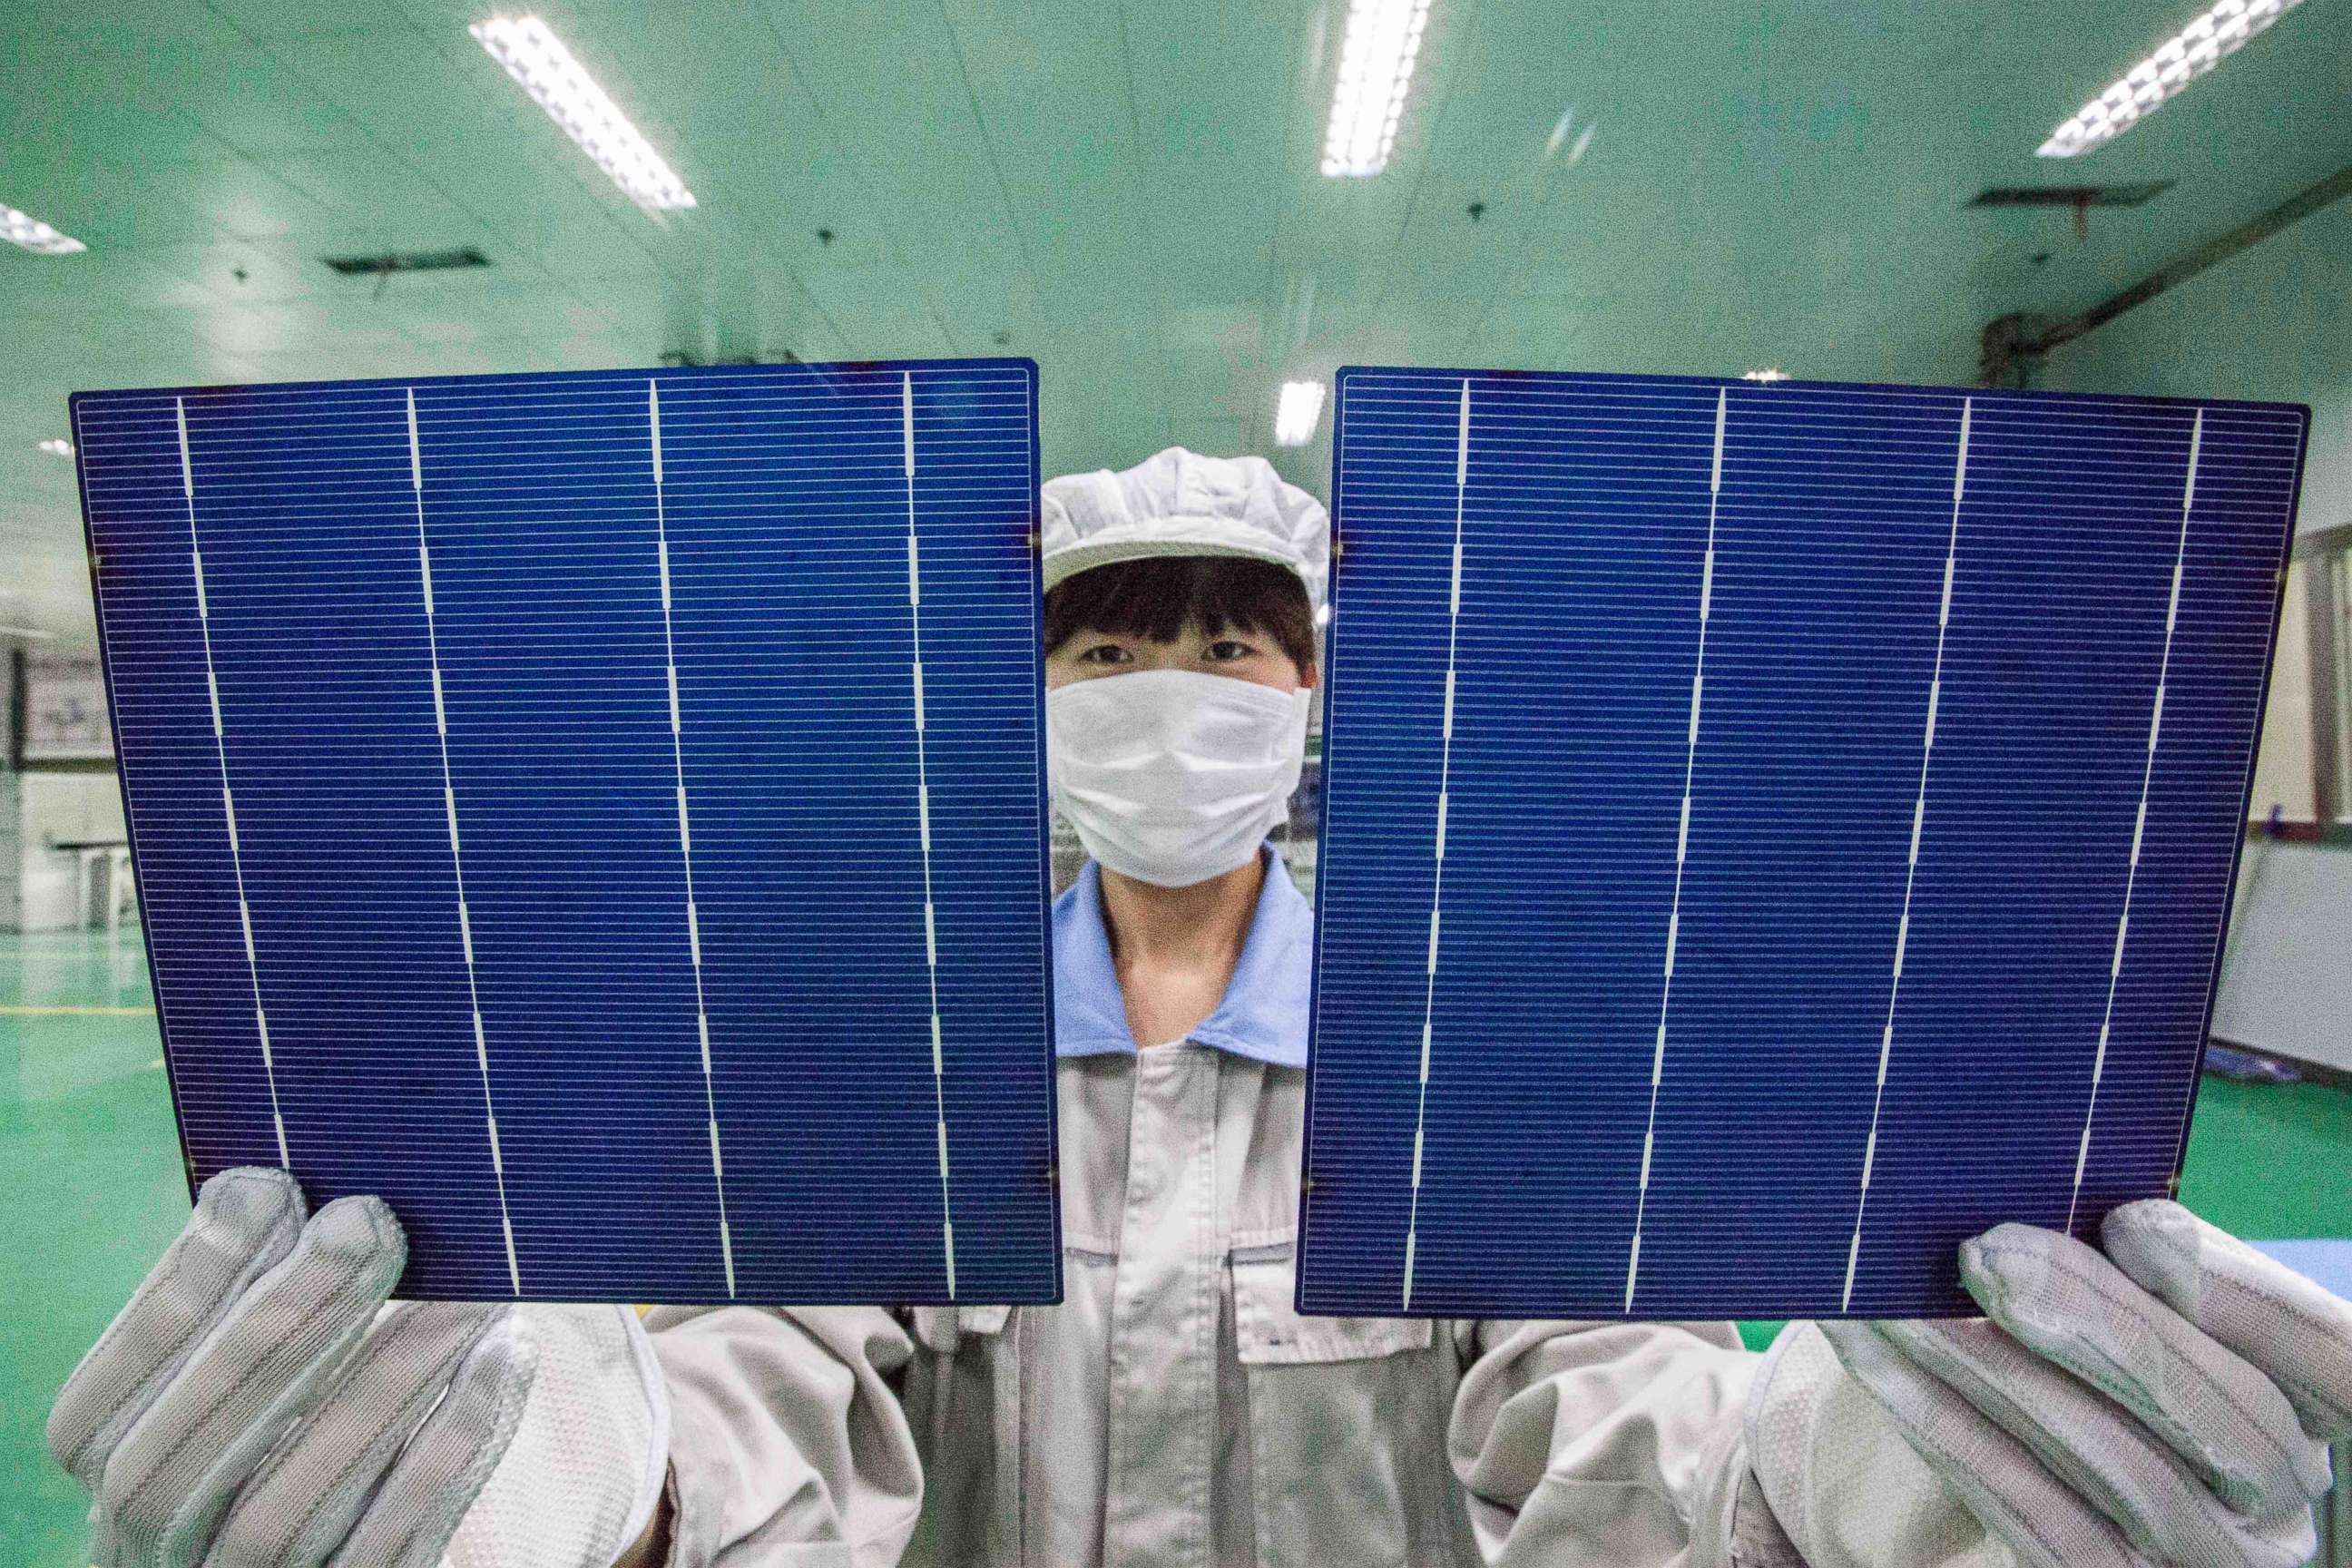 PHOTO: A Chinese worker shows photovoltaic cells to be used to make solar panels at a solar manufacturing plant in Lianyungang city, east Chinas Jiangsu province, China, Oct. 21, 2014.